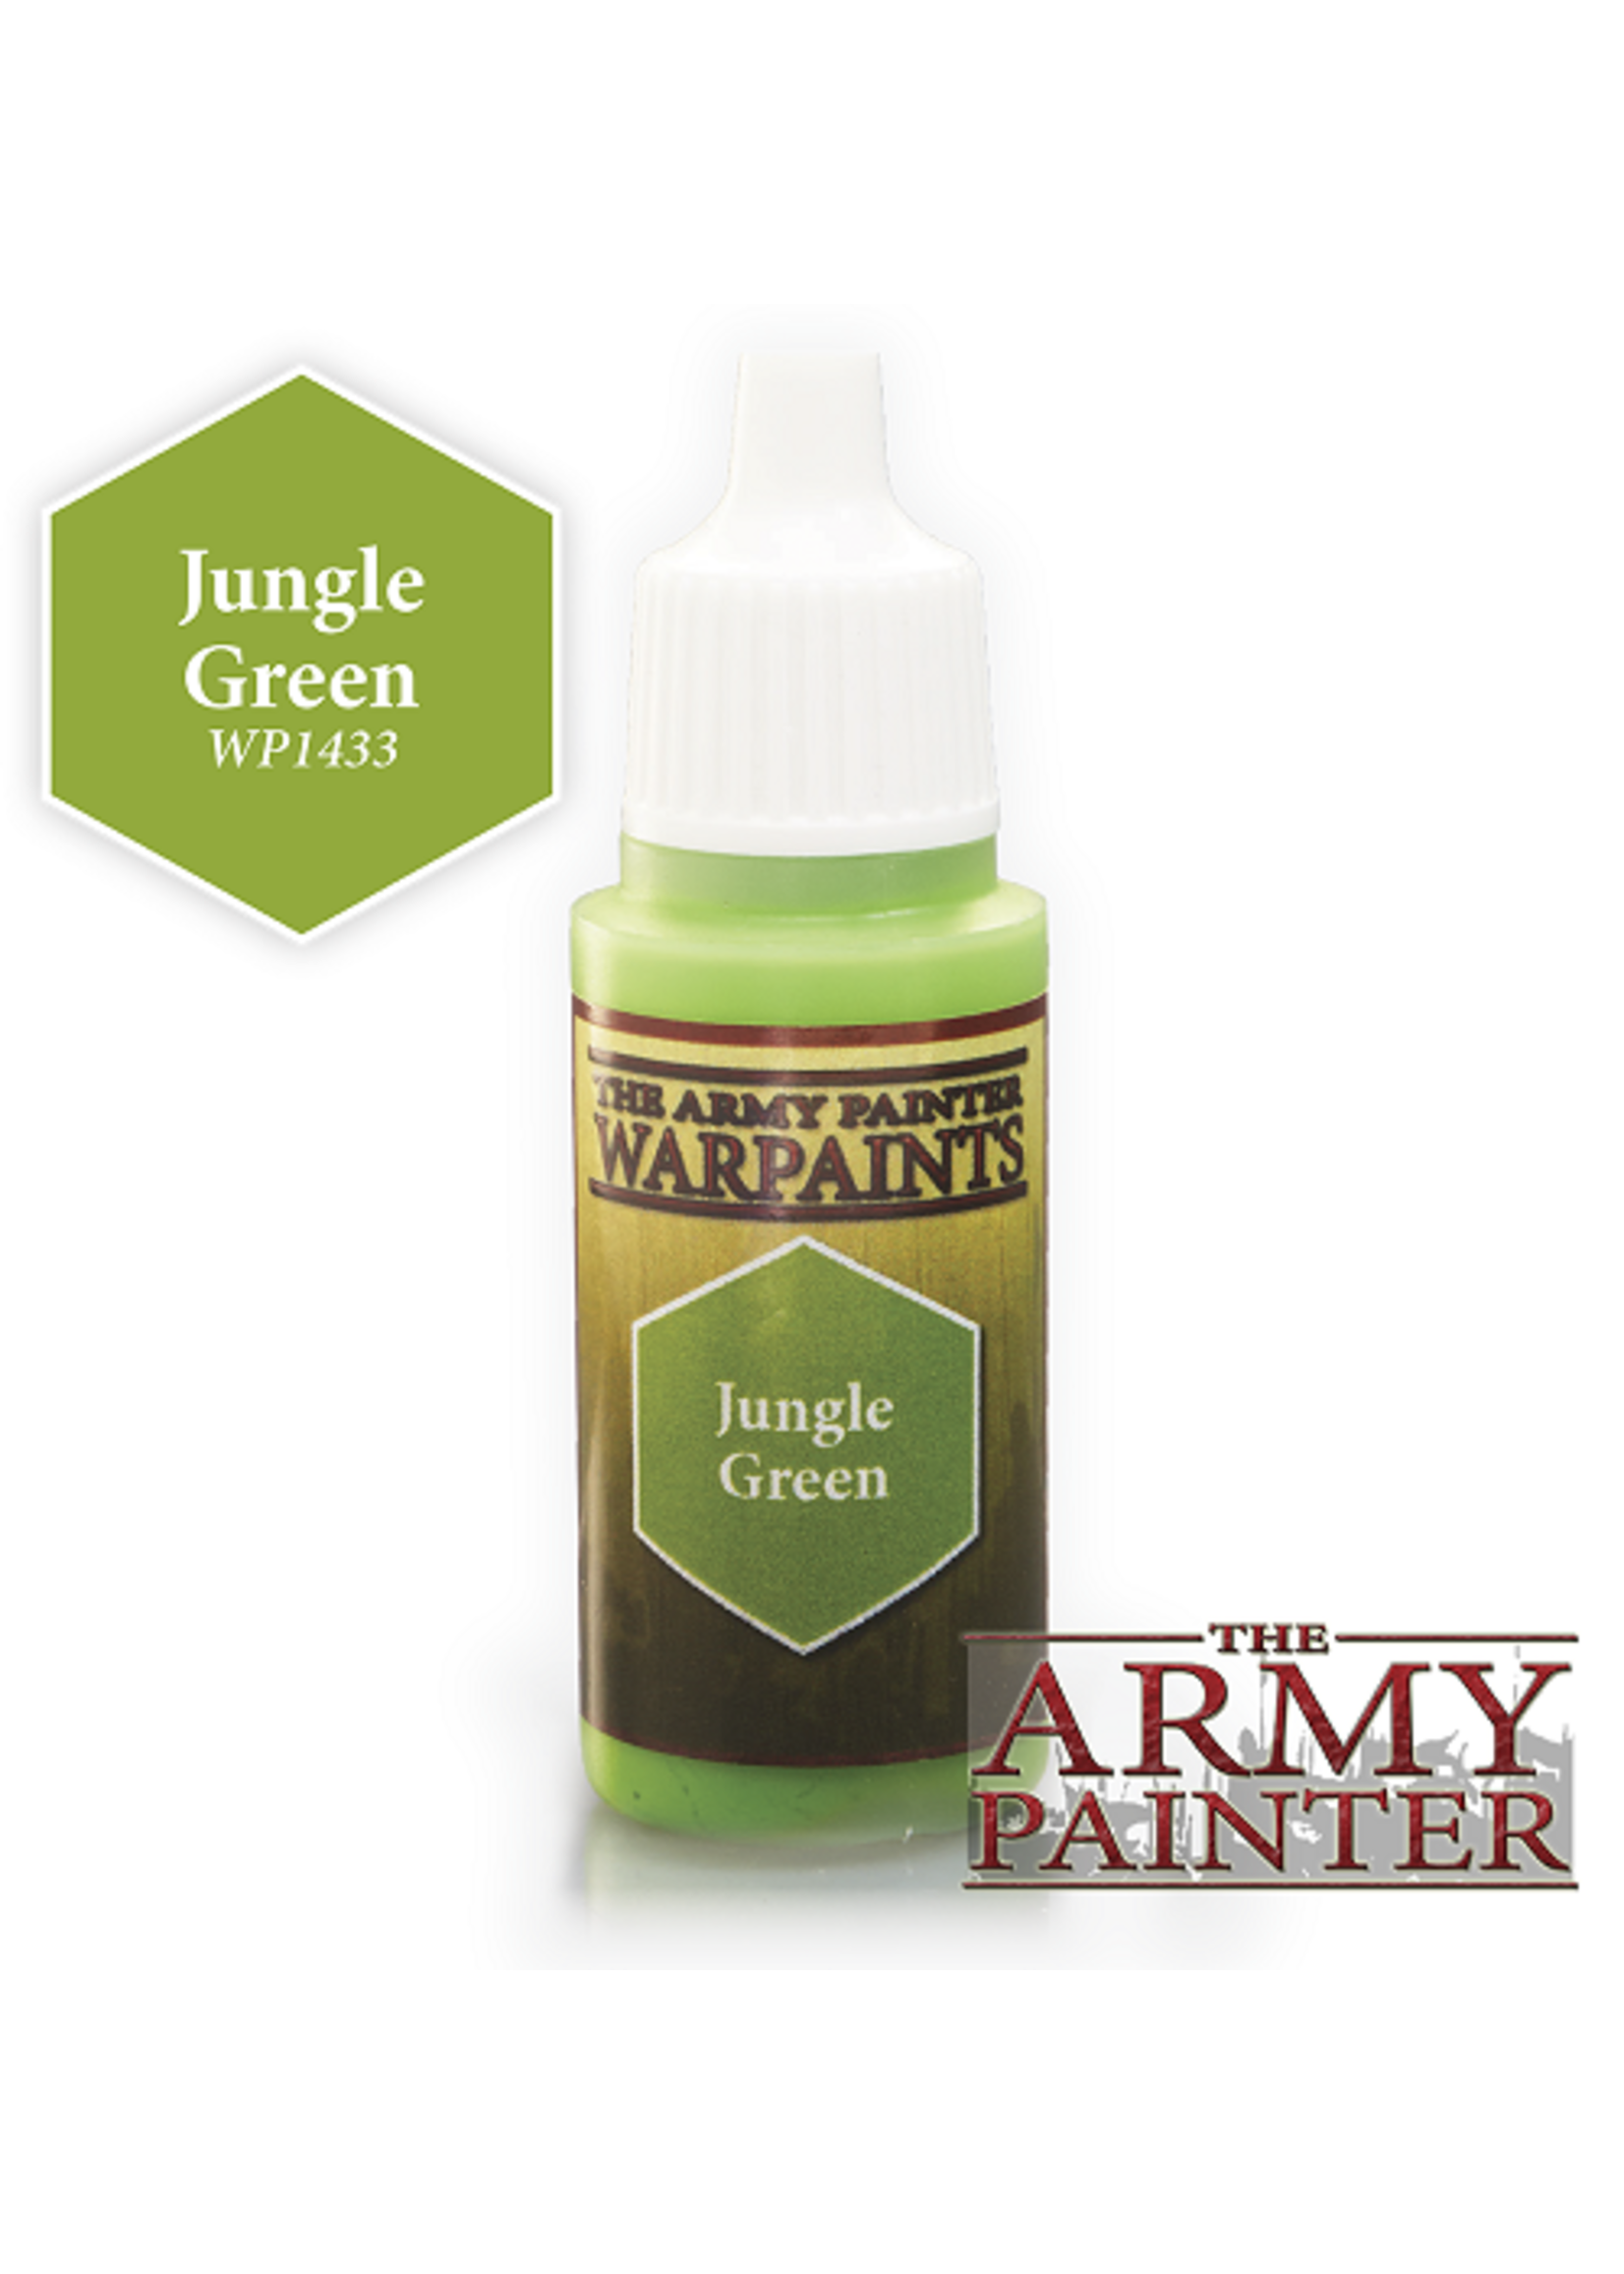 The Army Painter Acrylics Warpaints Jungle Green